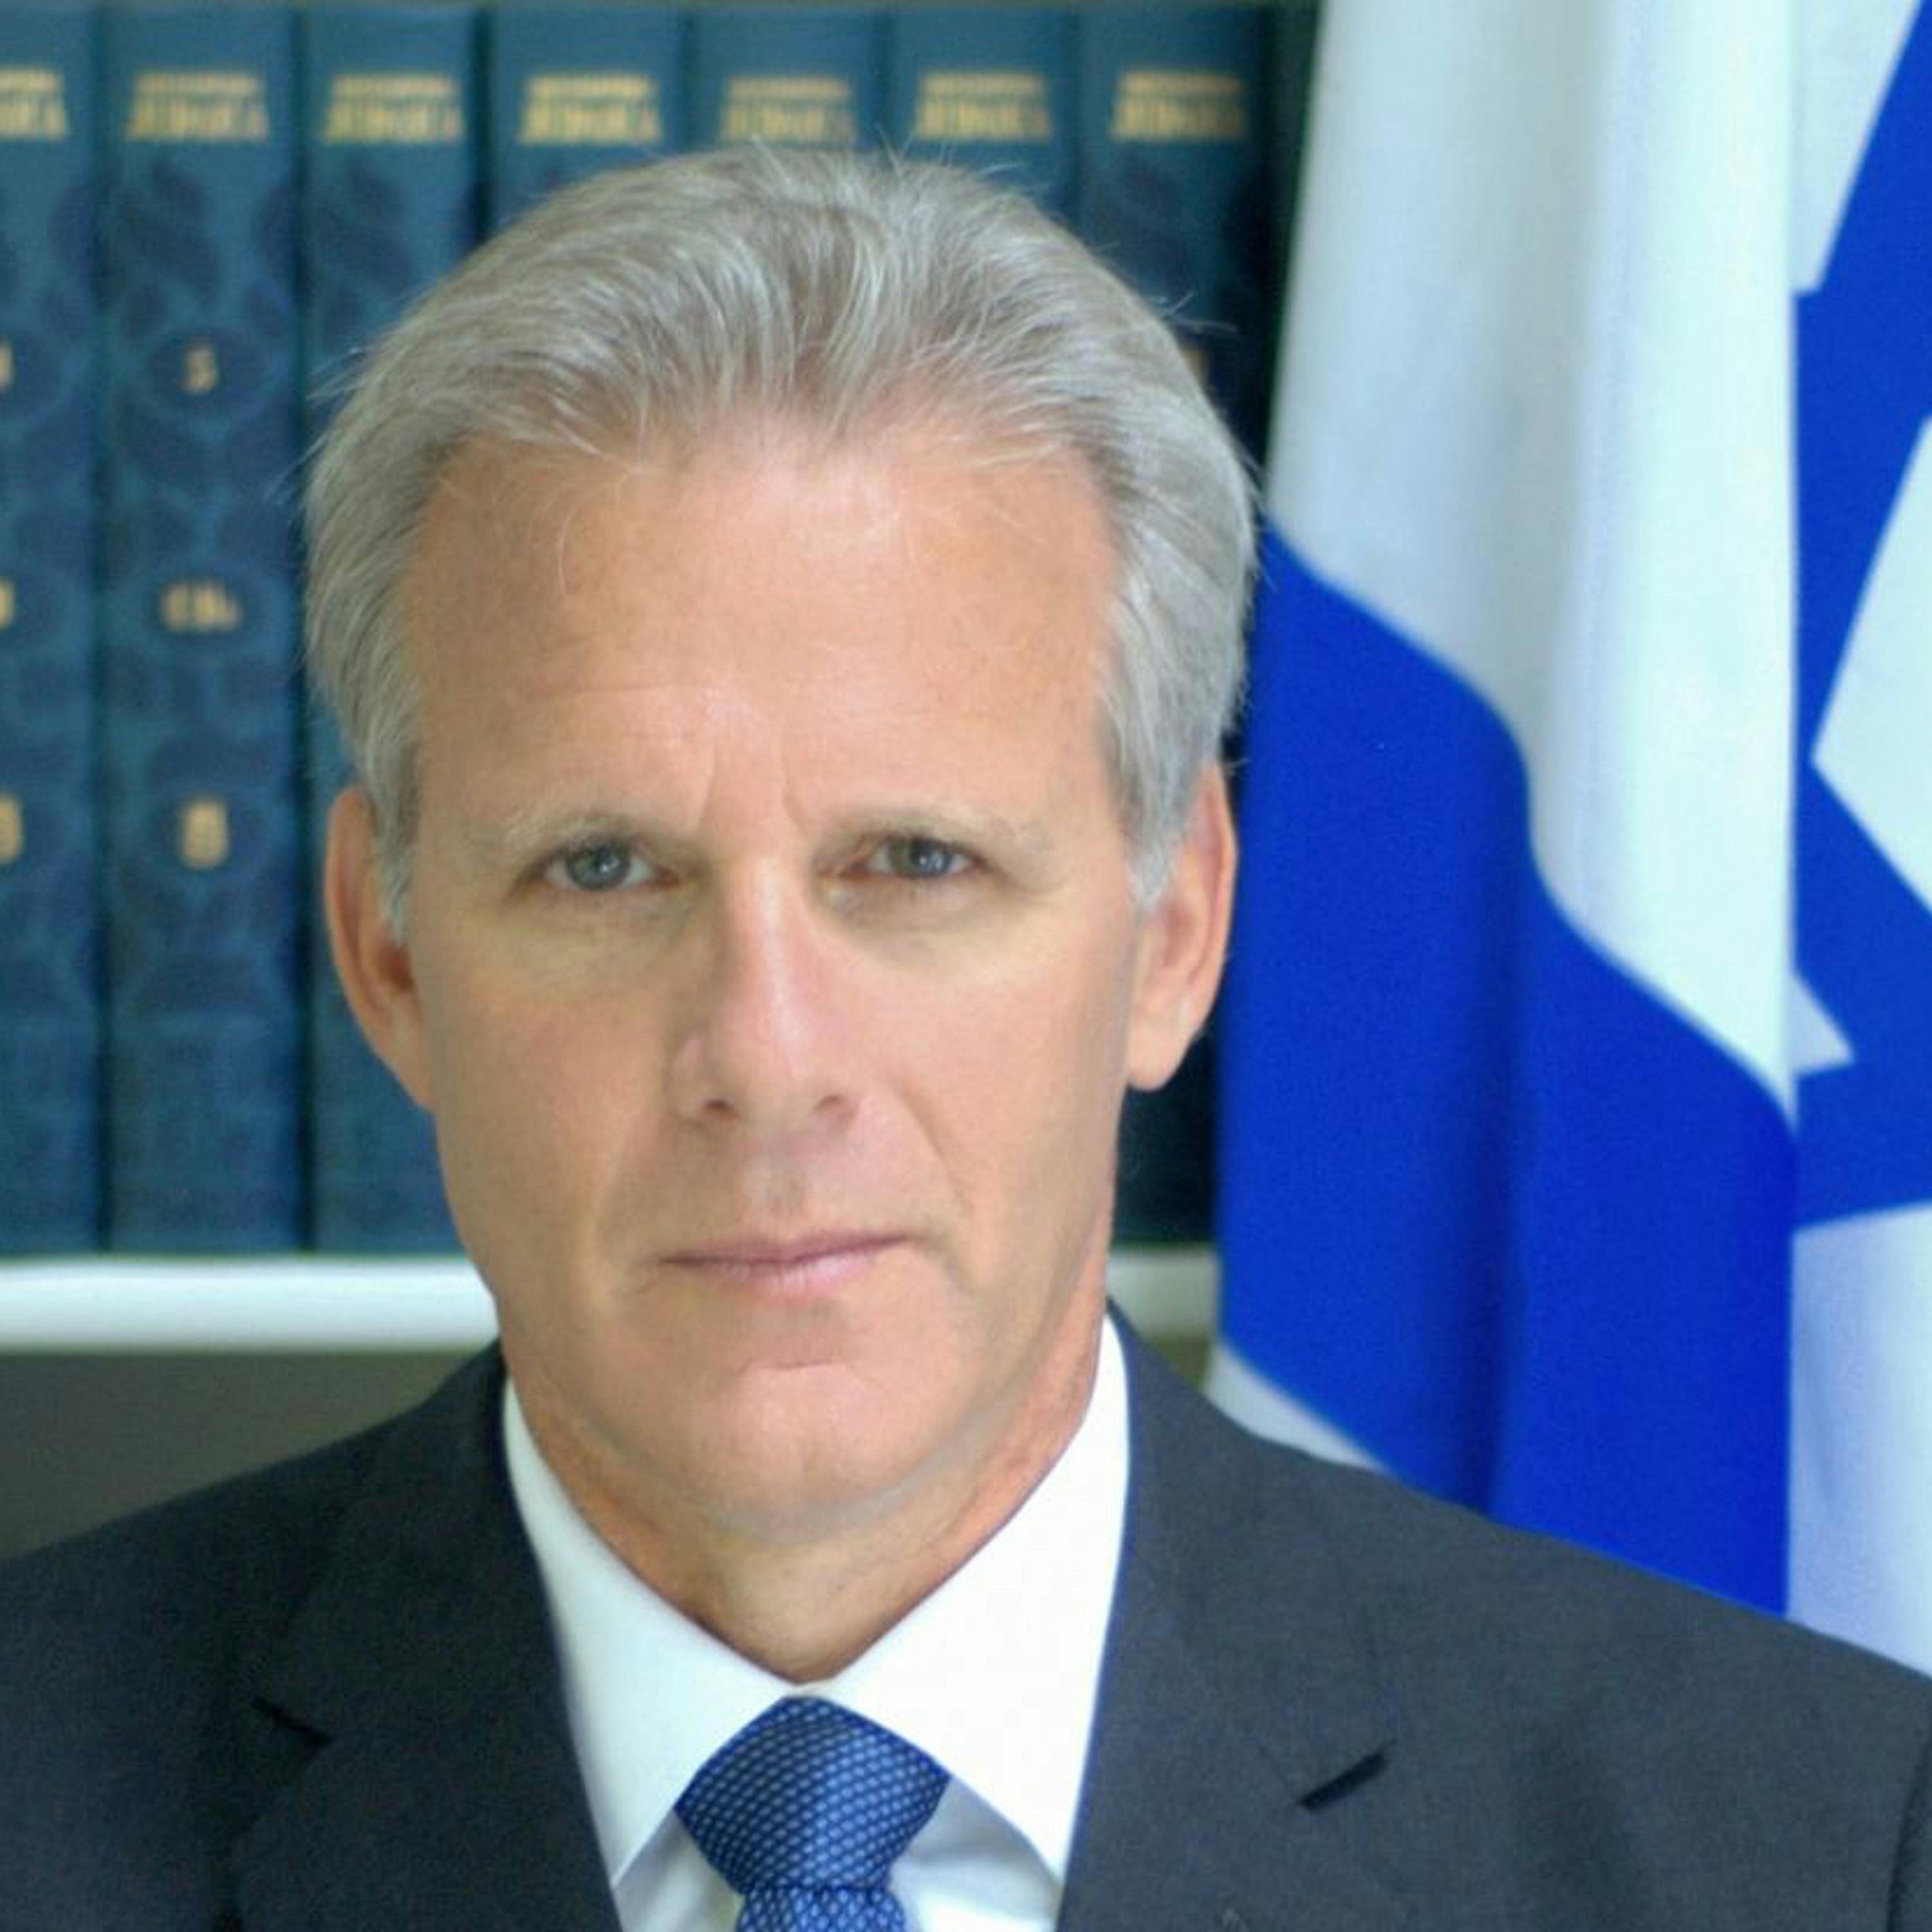 65: Ambassador Michael Oren: “We are living in the age of miracles”